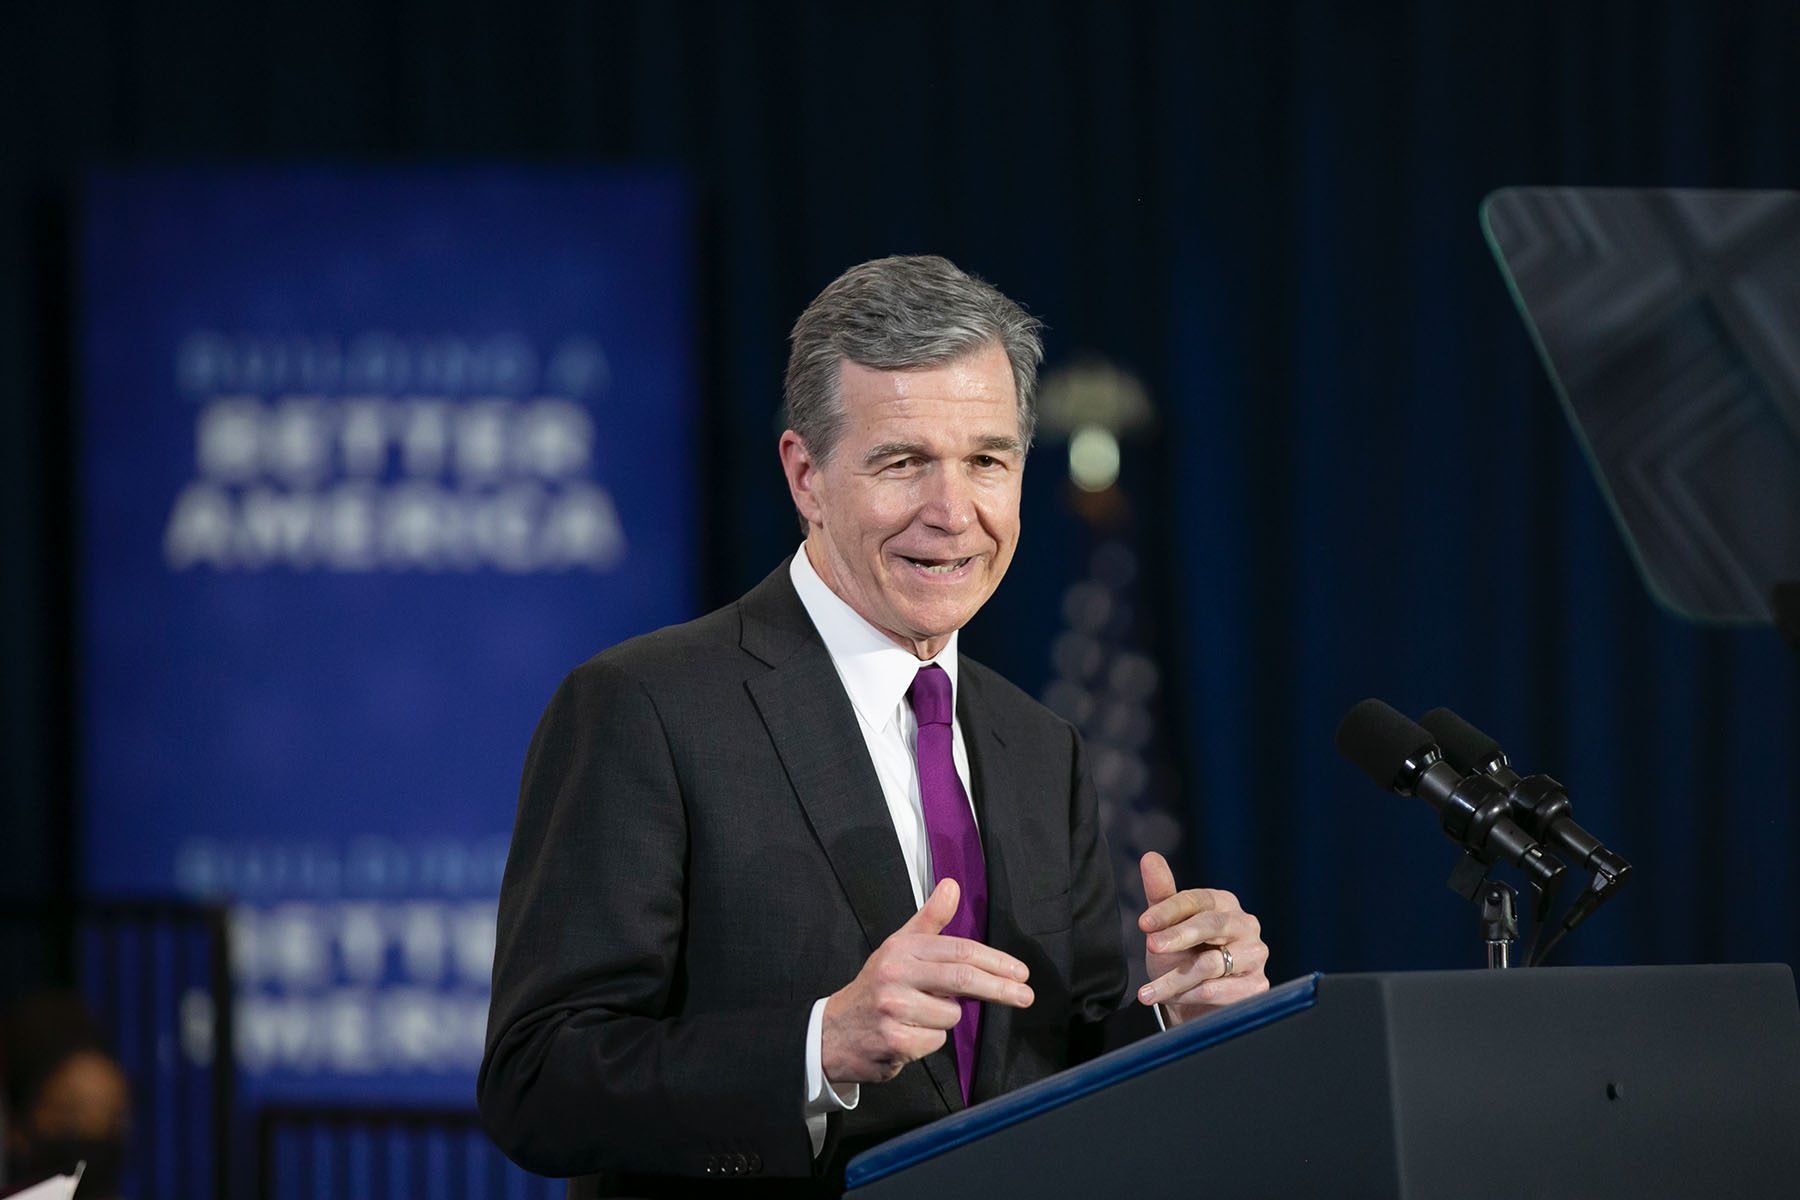 North Carolina Governor Roy Cooper speaks during President Biden's visit to North Carolina Agricultural and Technical State University.